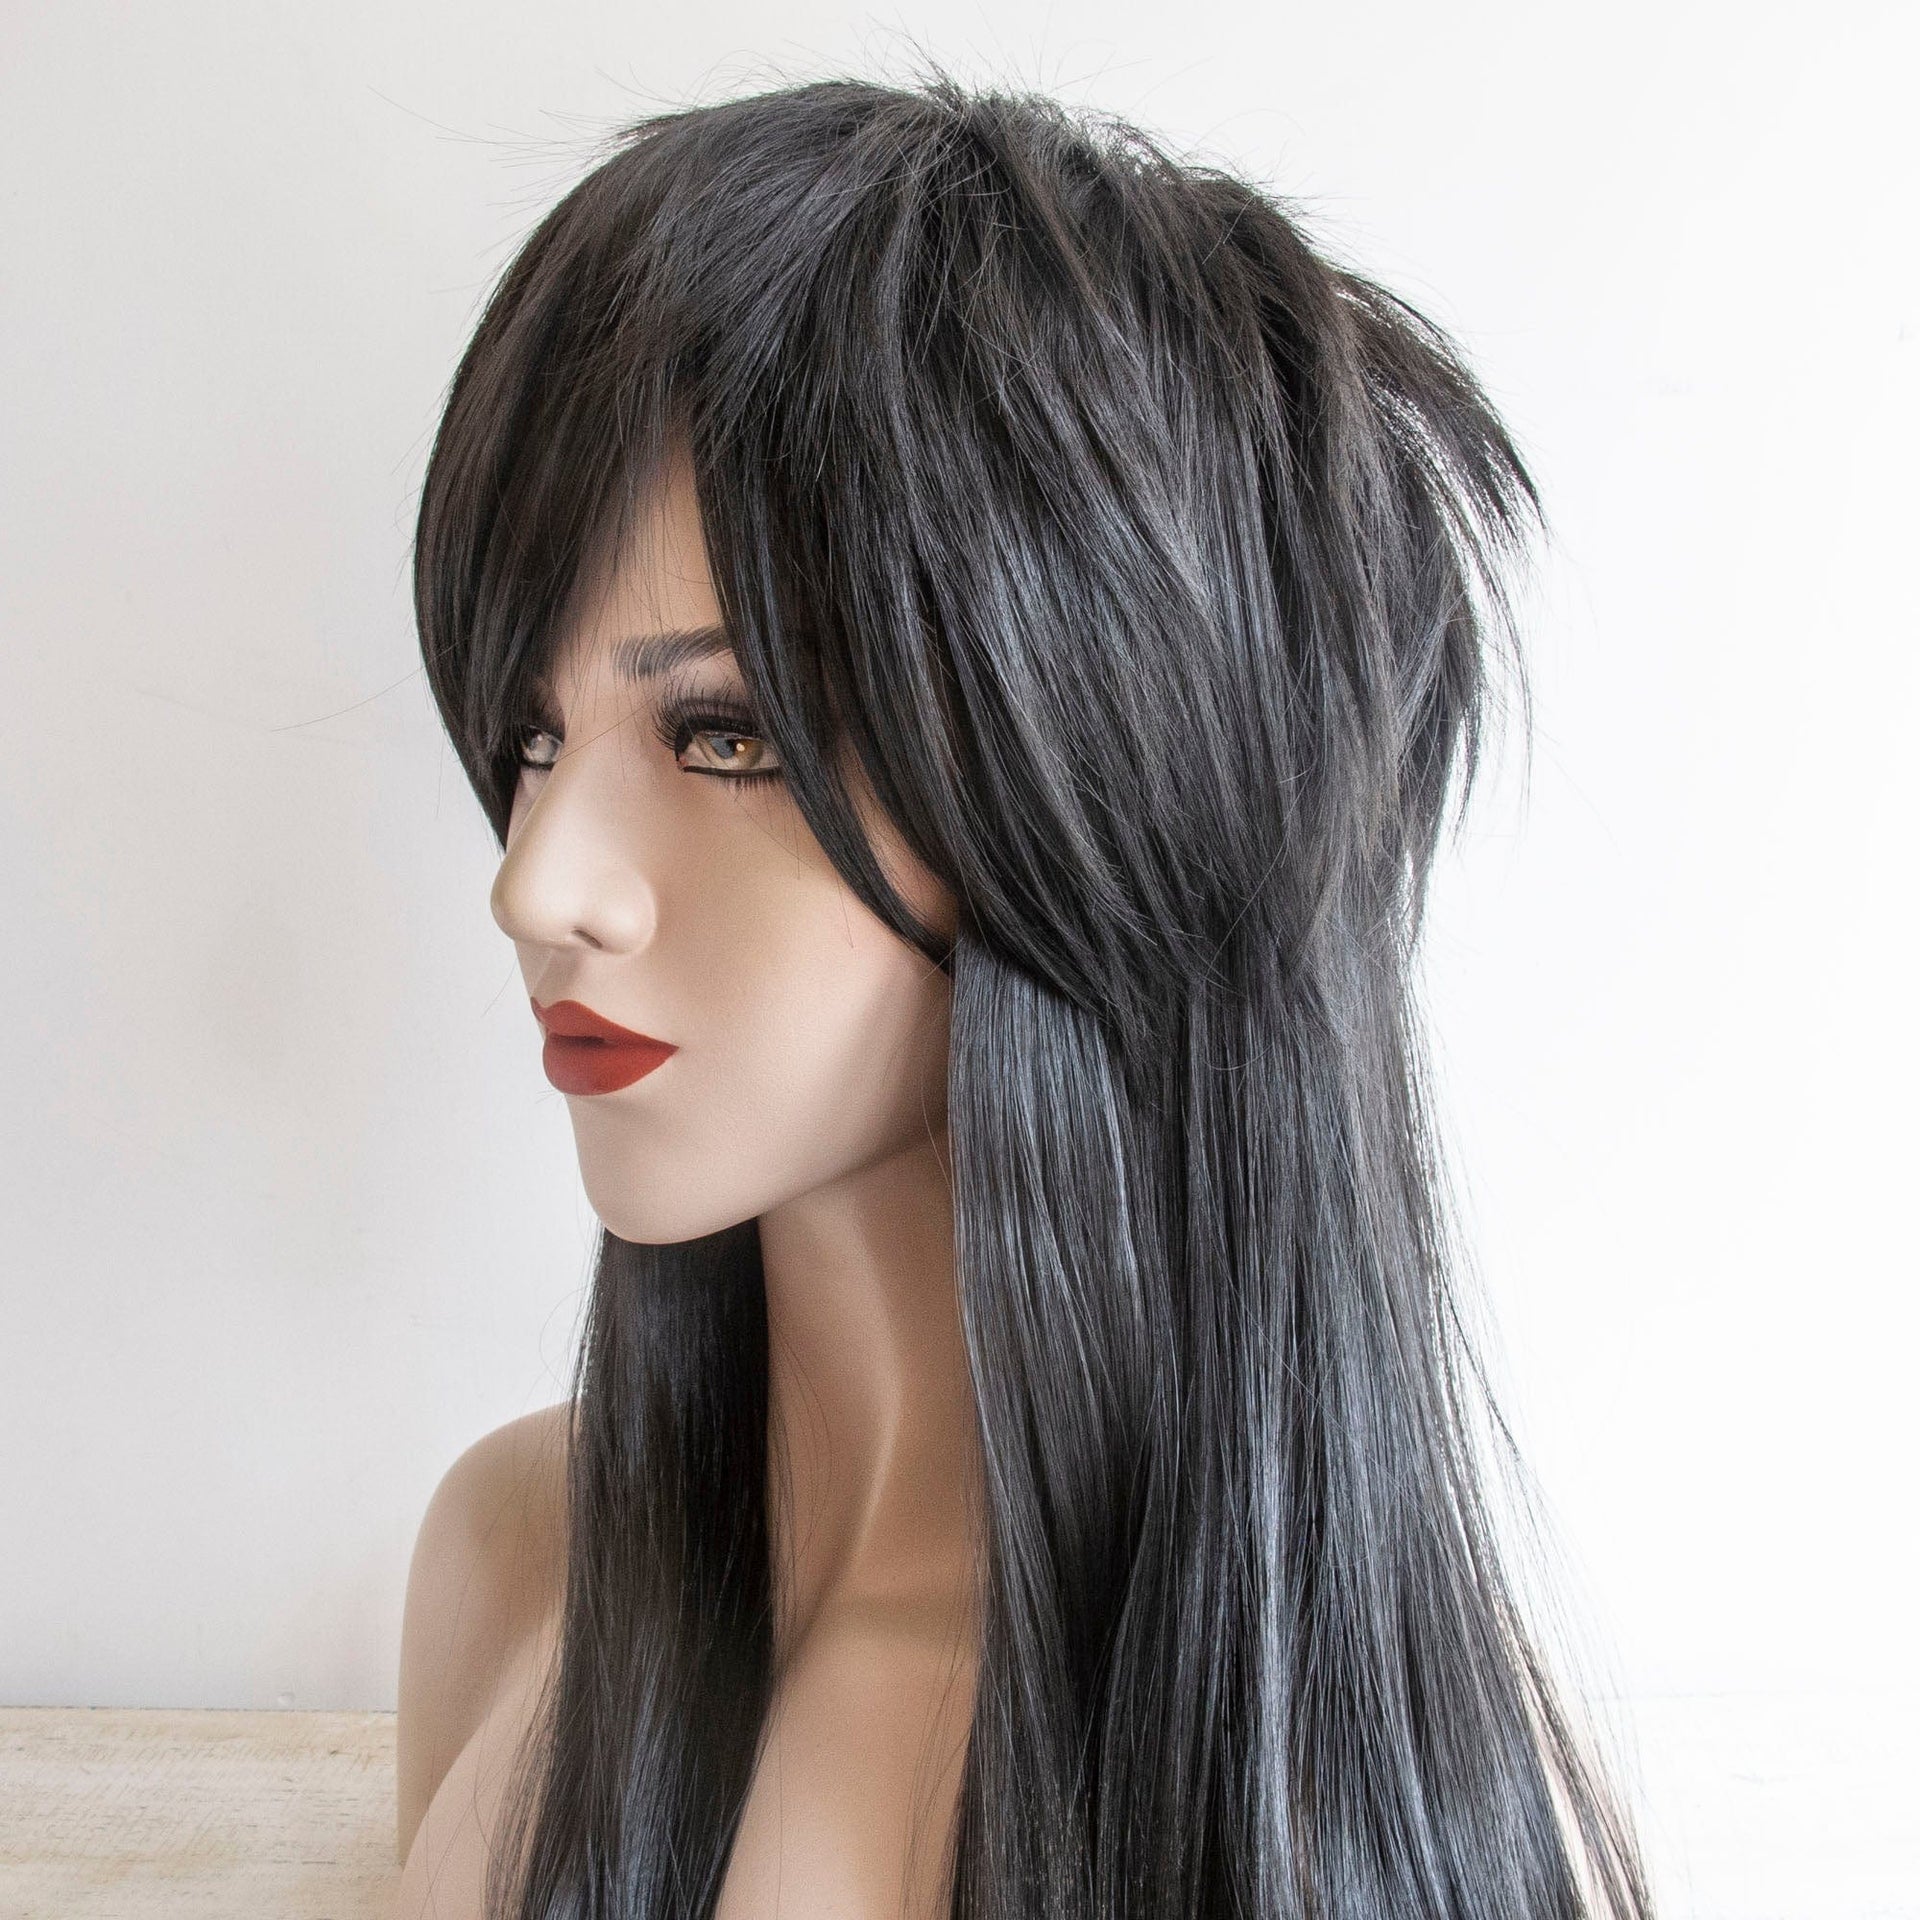 nevermindyrhead Wolf Cut Wig for women (Black Long Straight Fringe Bangs Gothic Mullet)